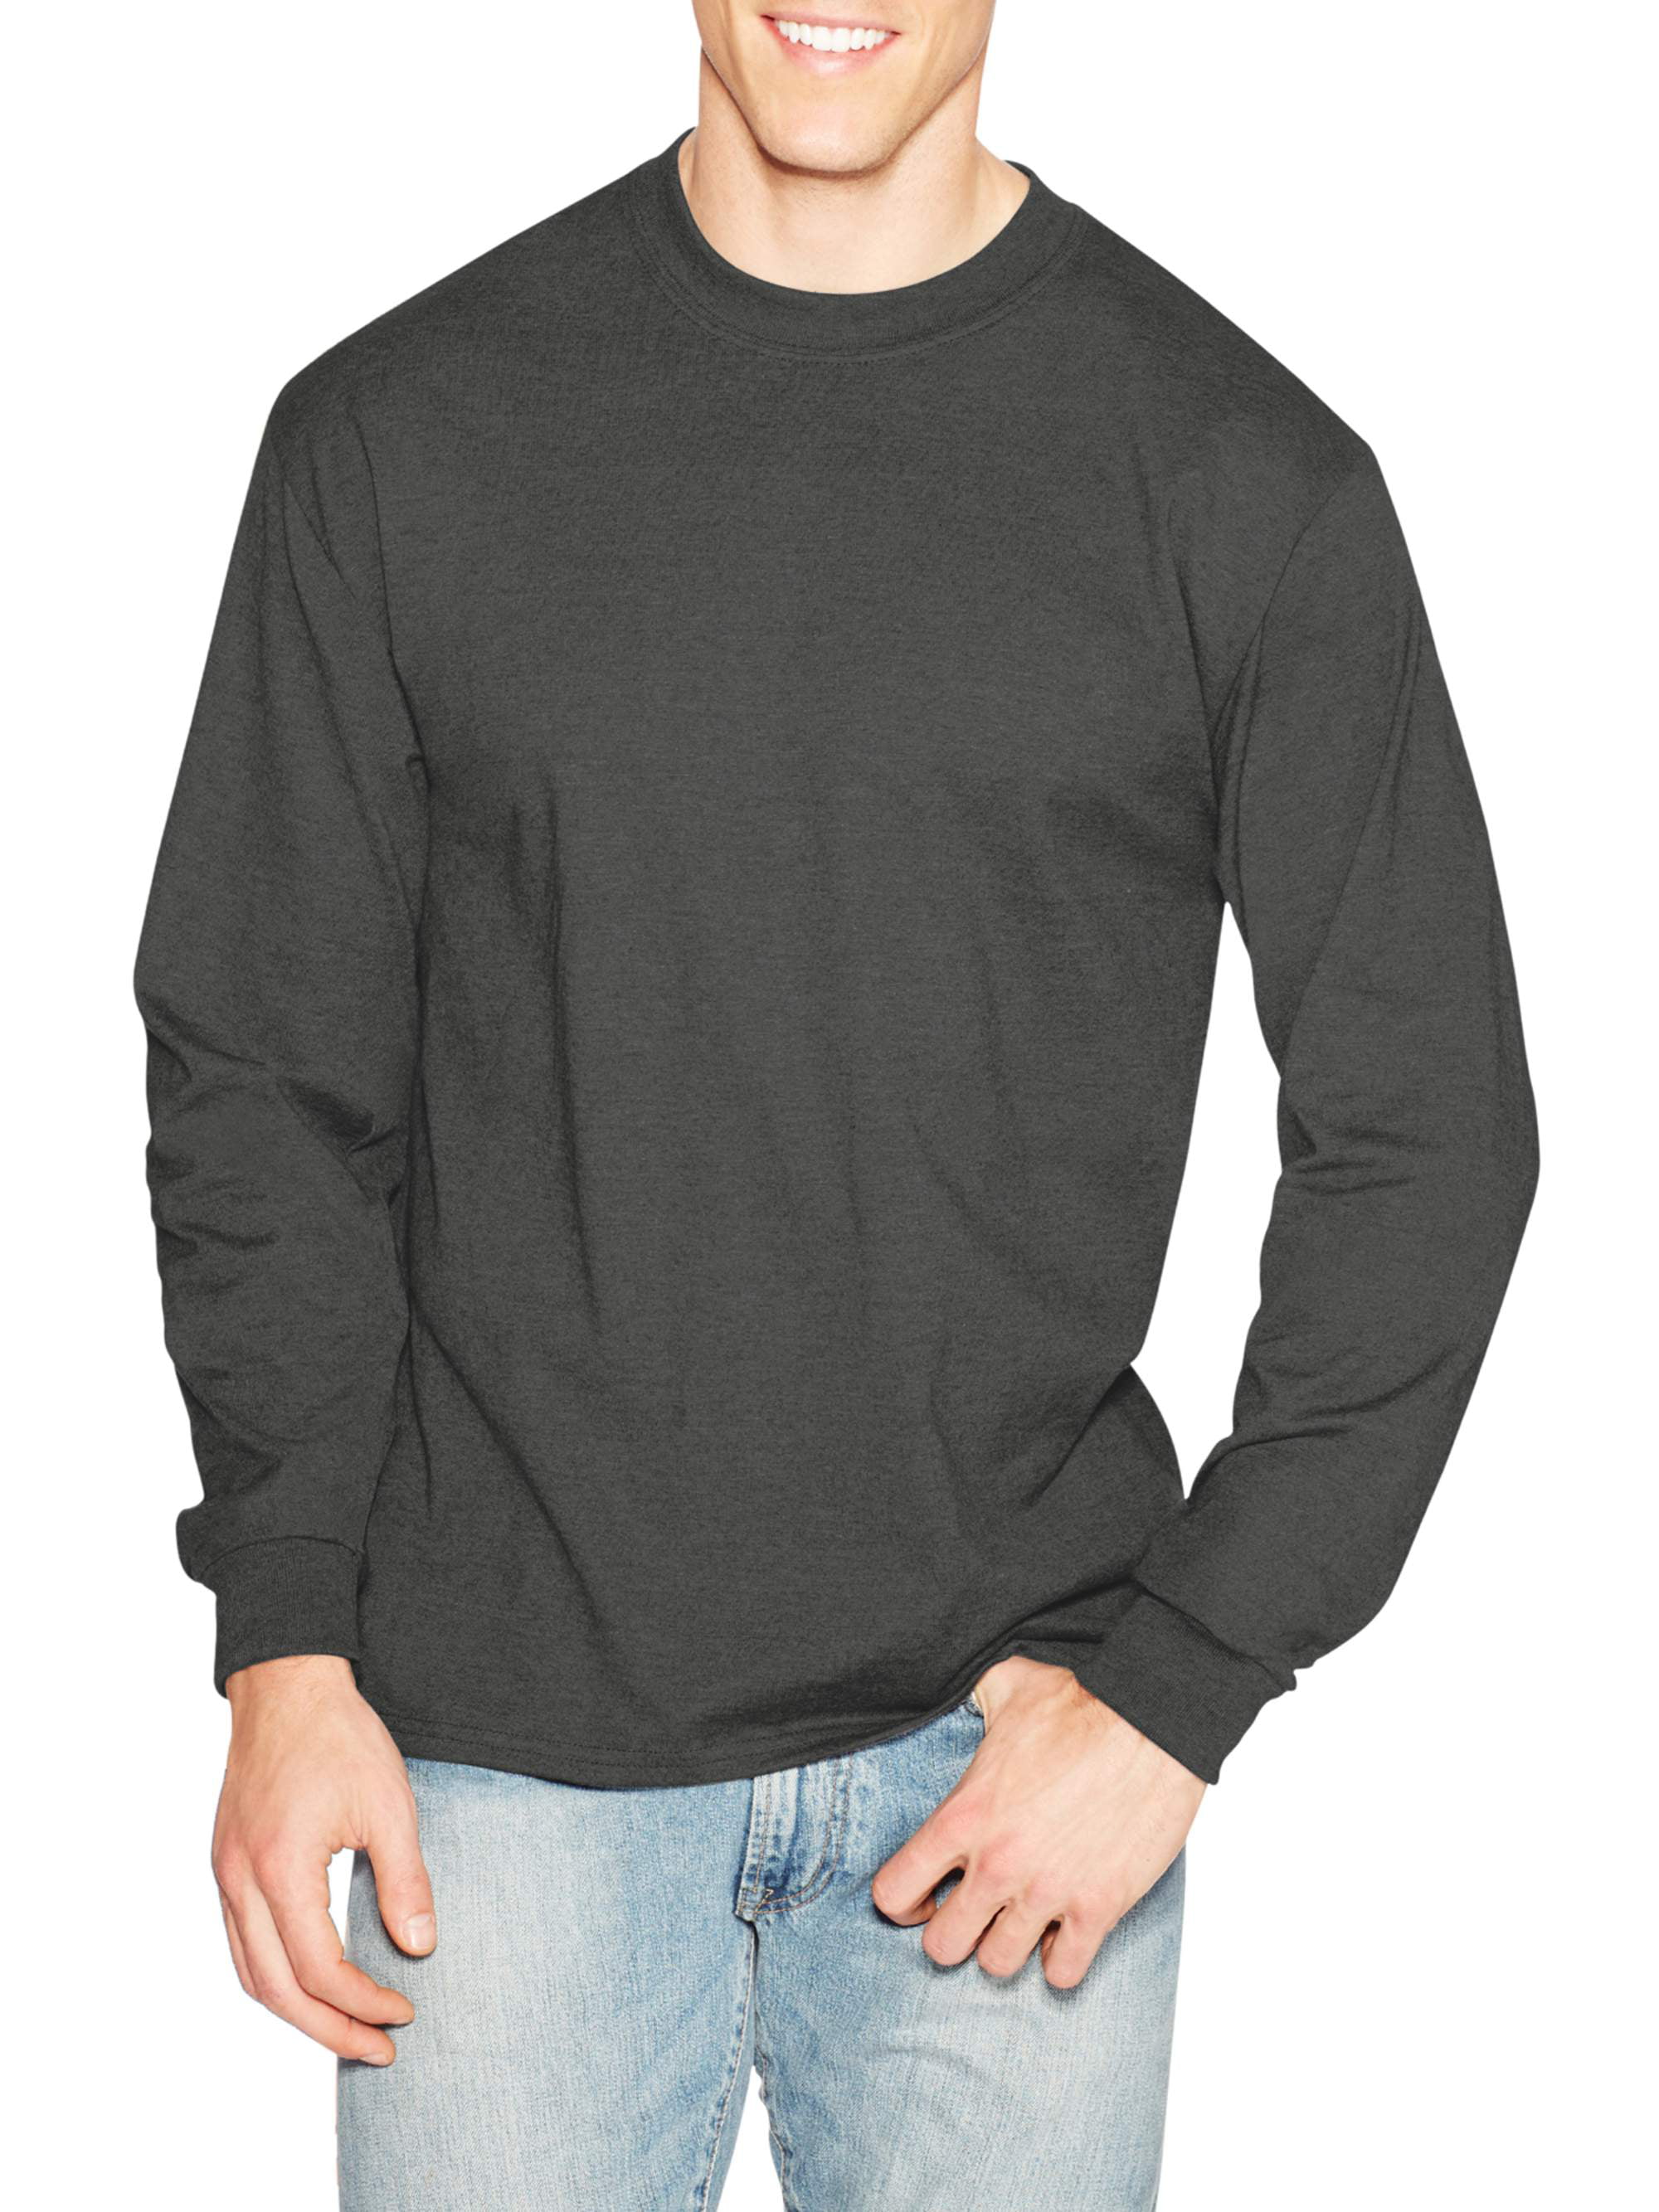 long sleeve t shirts with pocket